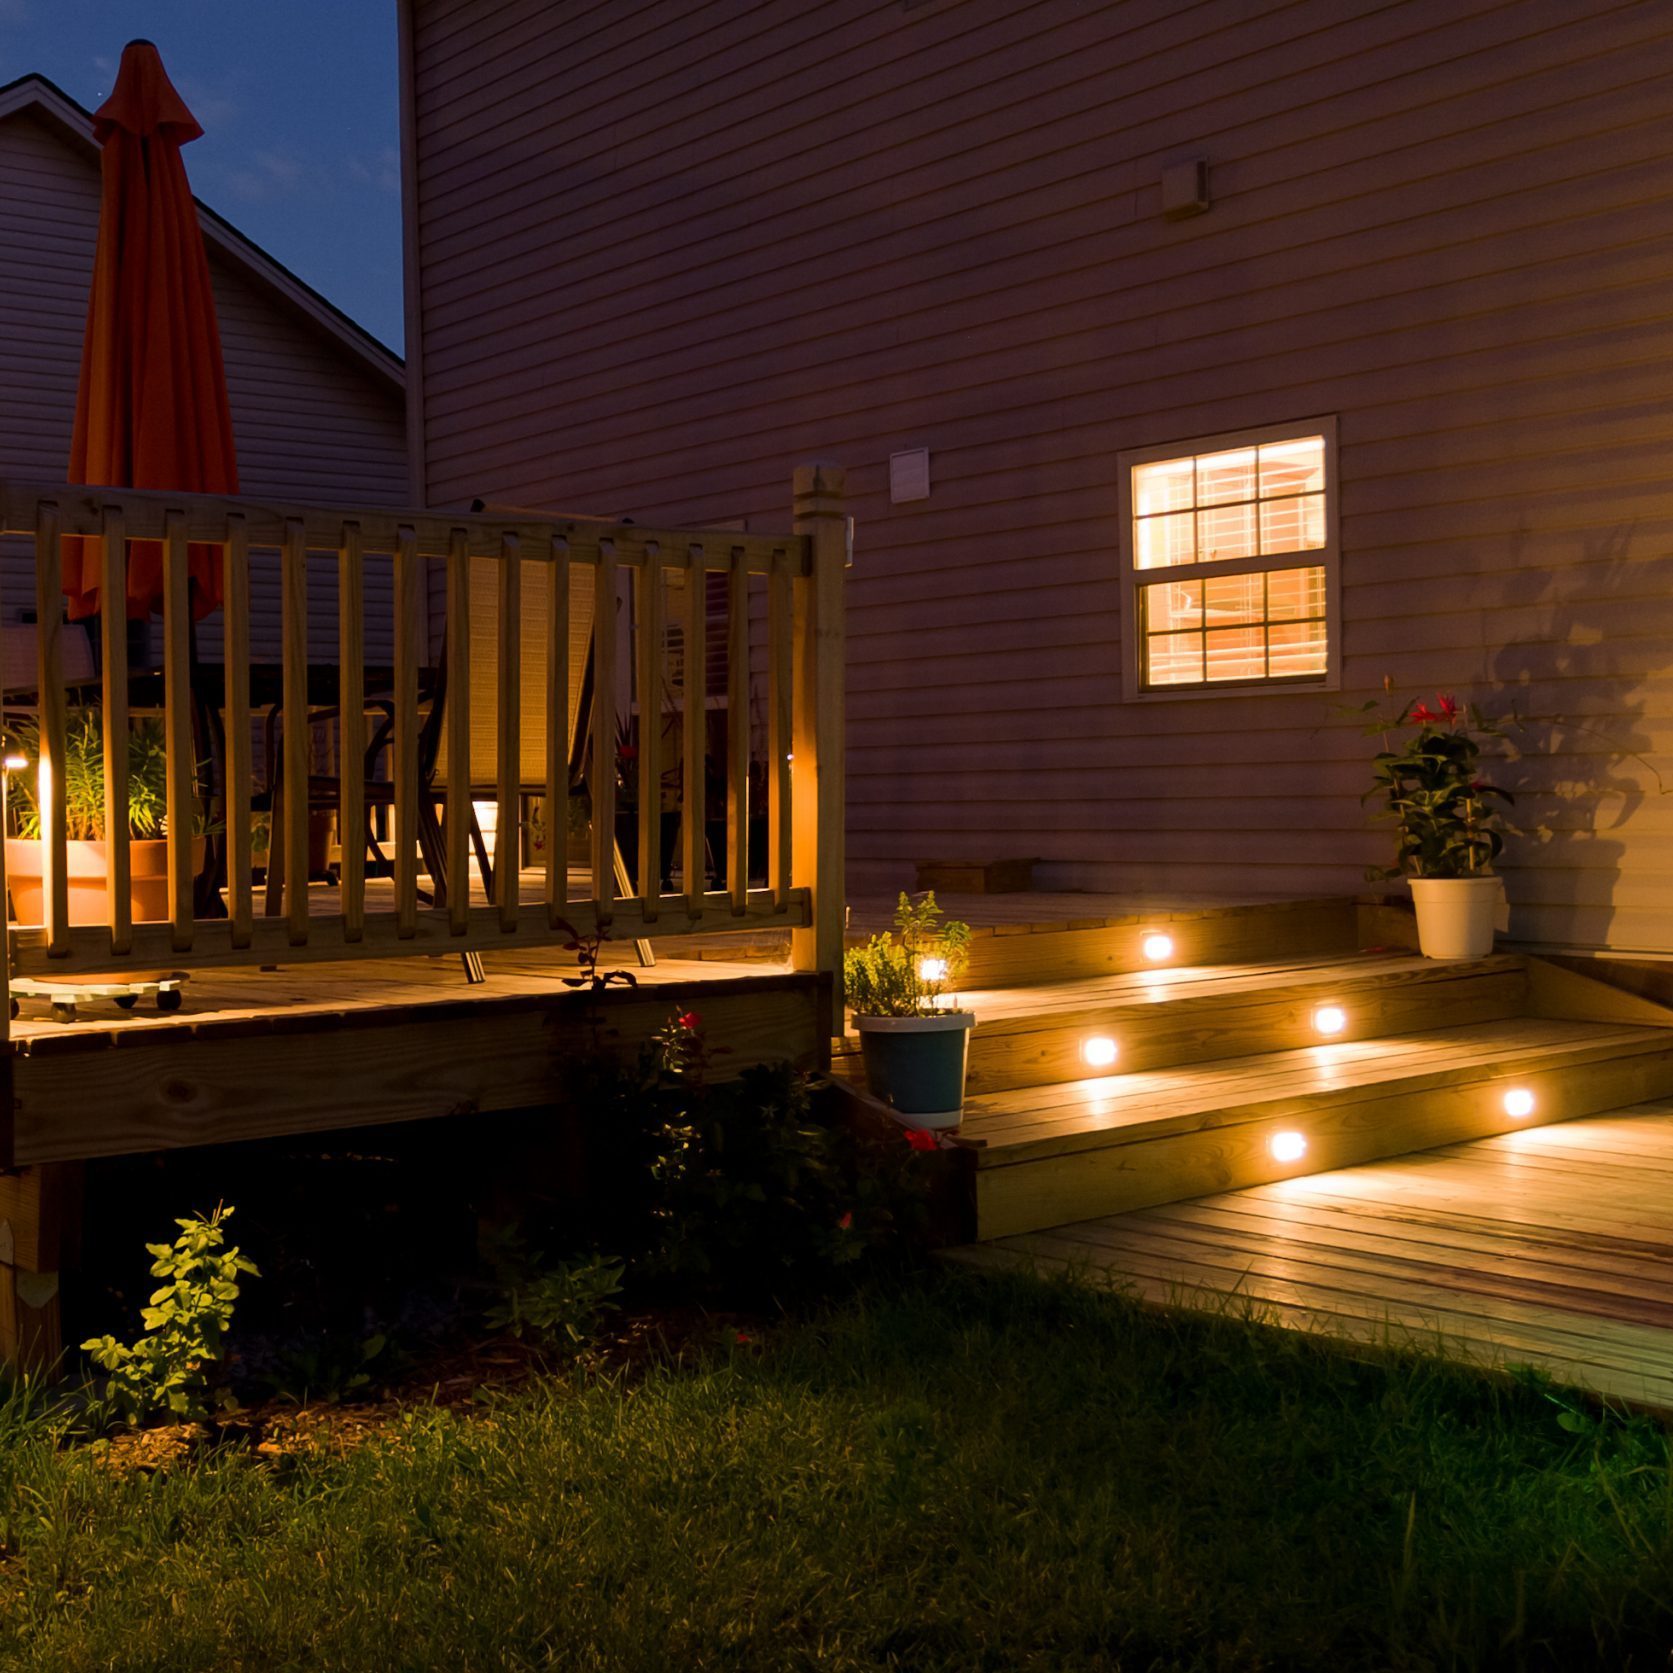 Wooden deck and patio with stair lights of family home at night